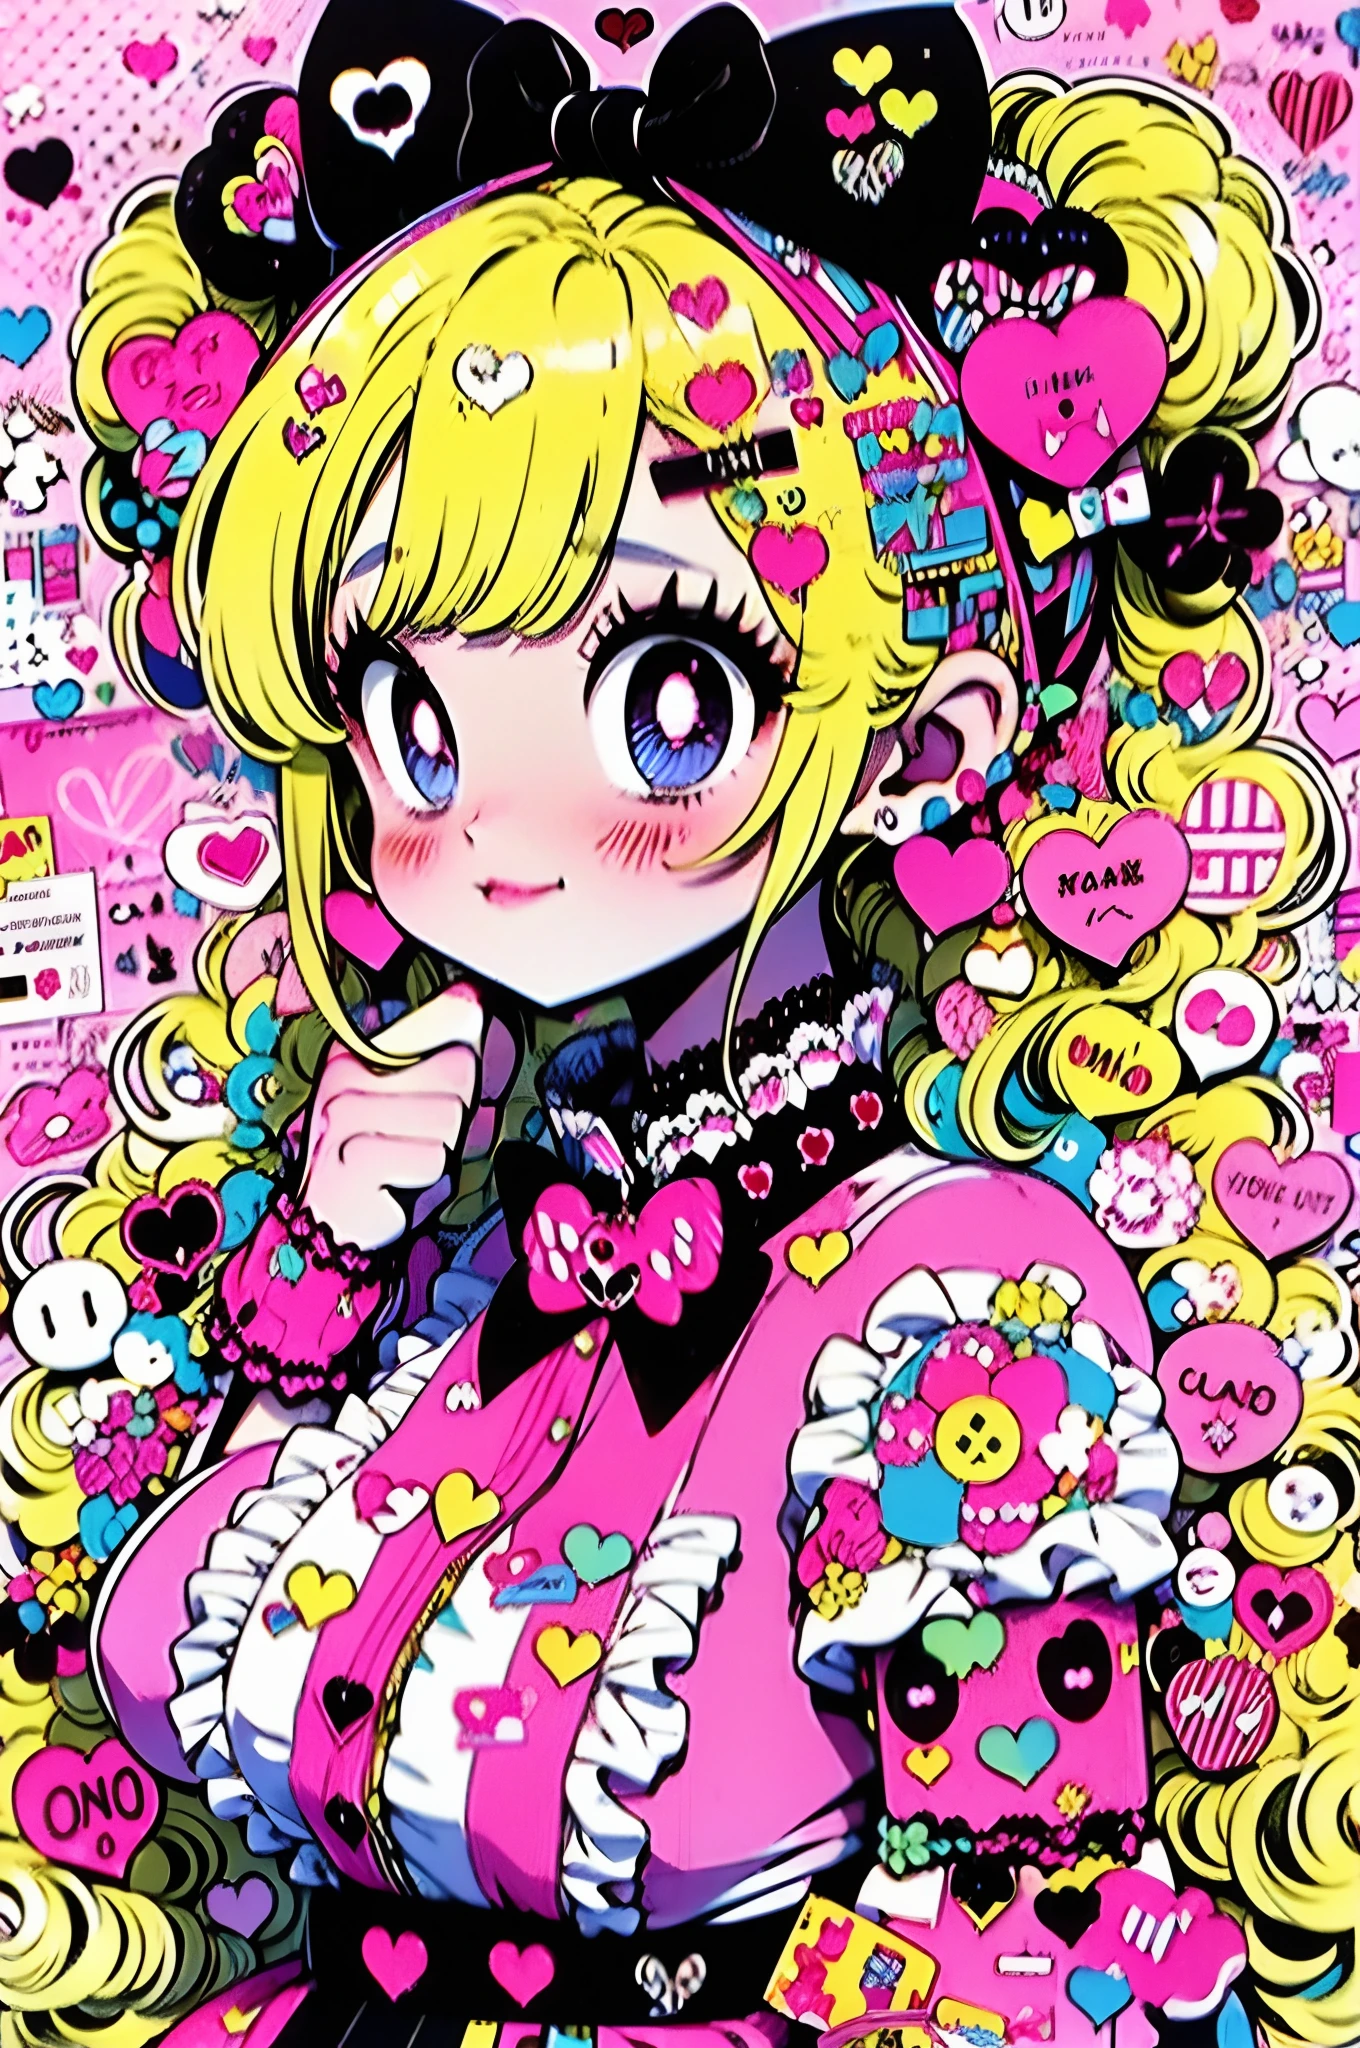 1girl, ashy-blonde hair, heart ornaments, braided pigtails with candy accessory, she is wearing a bow of different color on each pigtail: one dark pink and the other white, her outfit is that of a maid from a maid cafe in dark-pink color with white ruffles and lace, inlcudes cute buttons with paw-shape, holding heart shaped chocolate or sweets, the background is pretty and simple yet detailed,